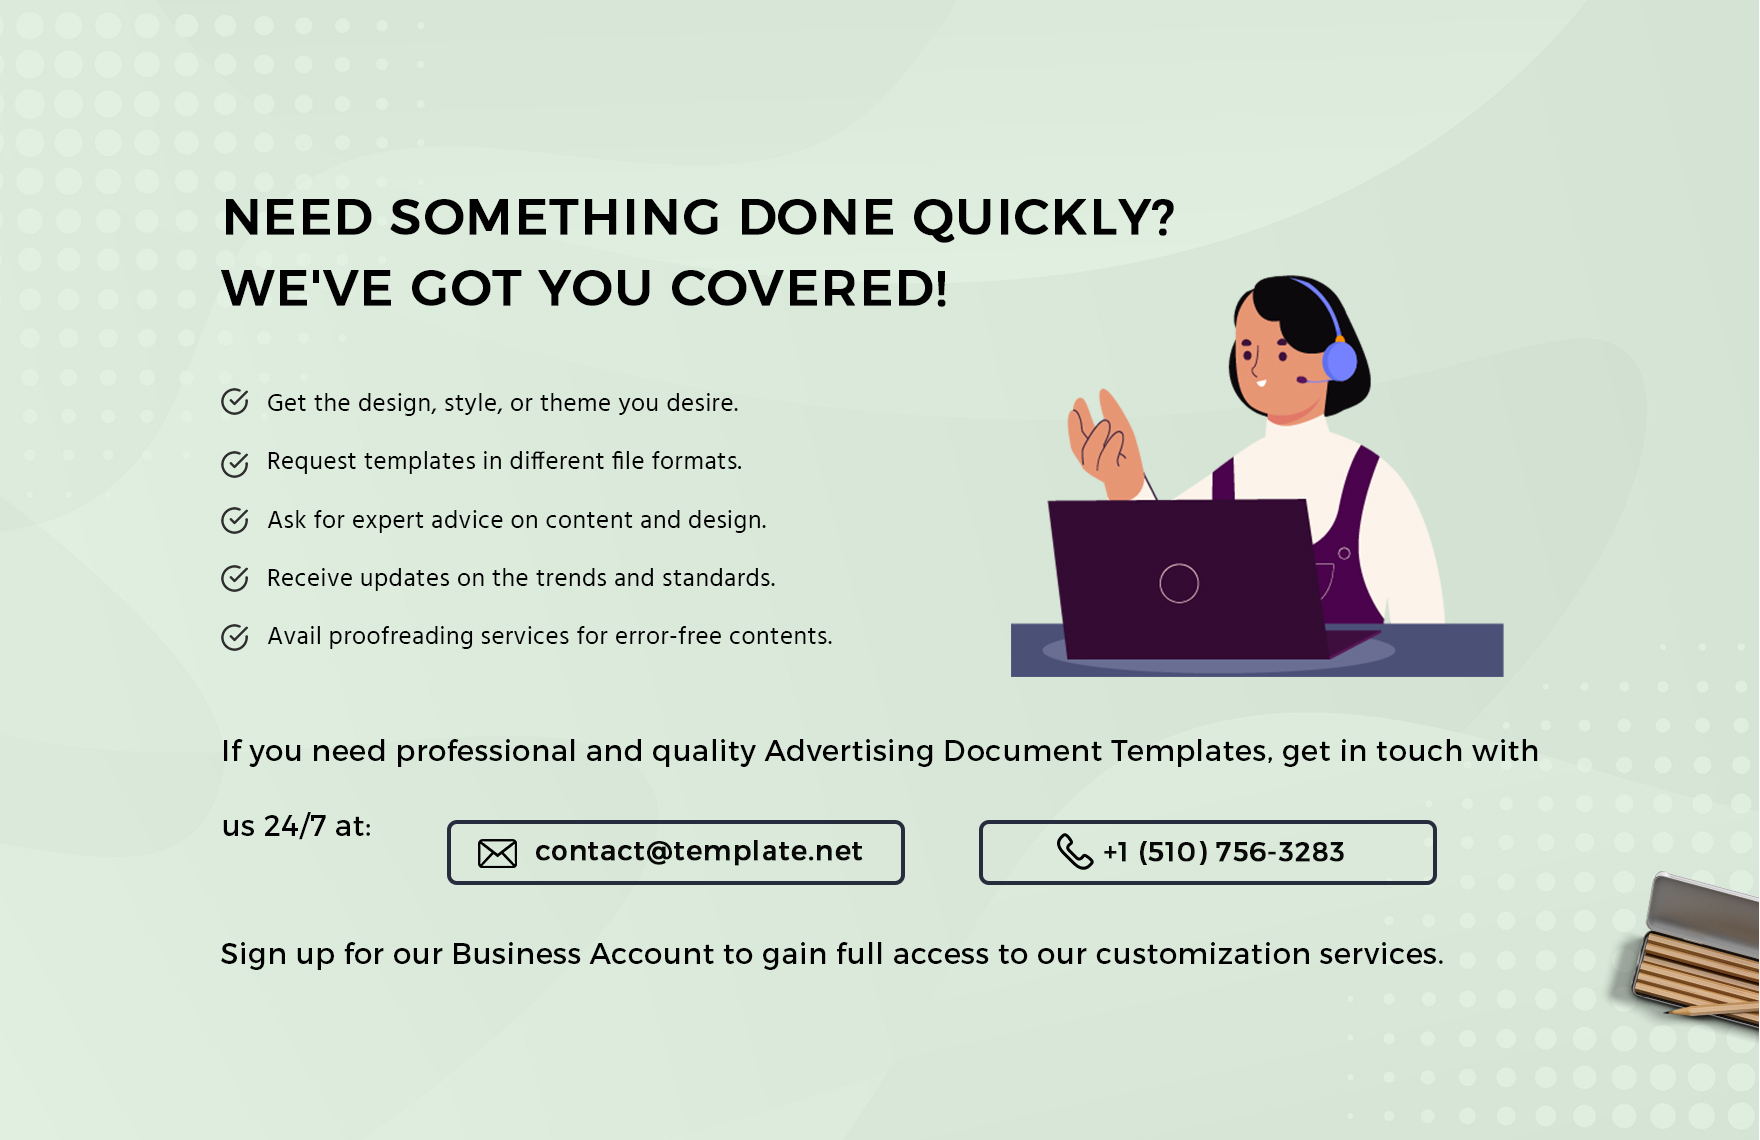 Advertising Campaign Contract Template